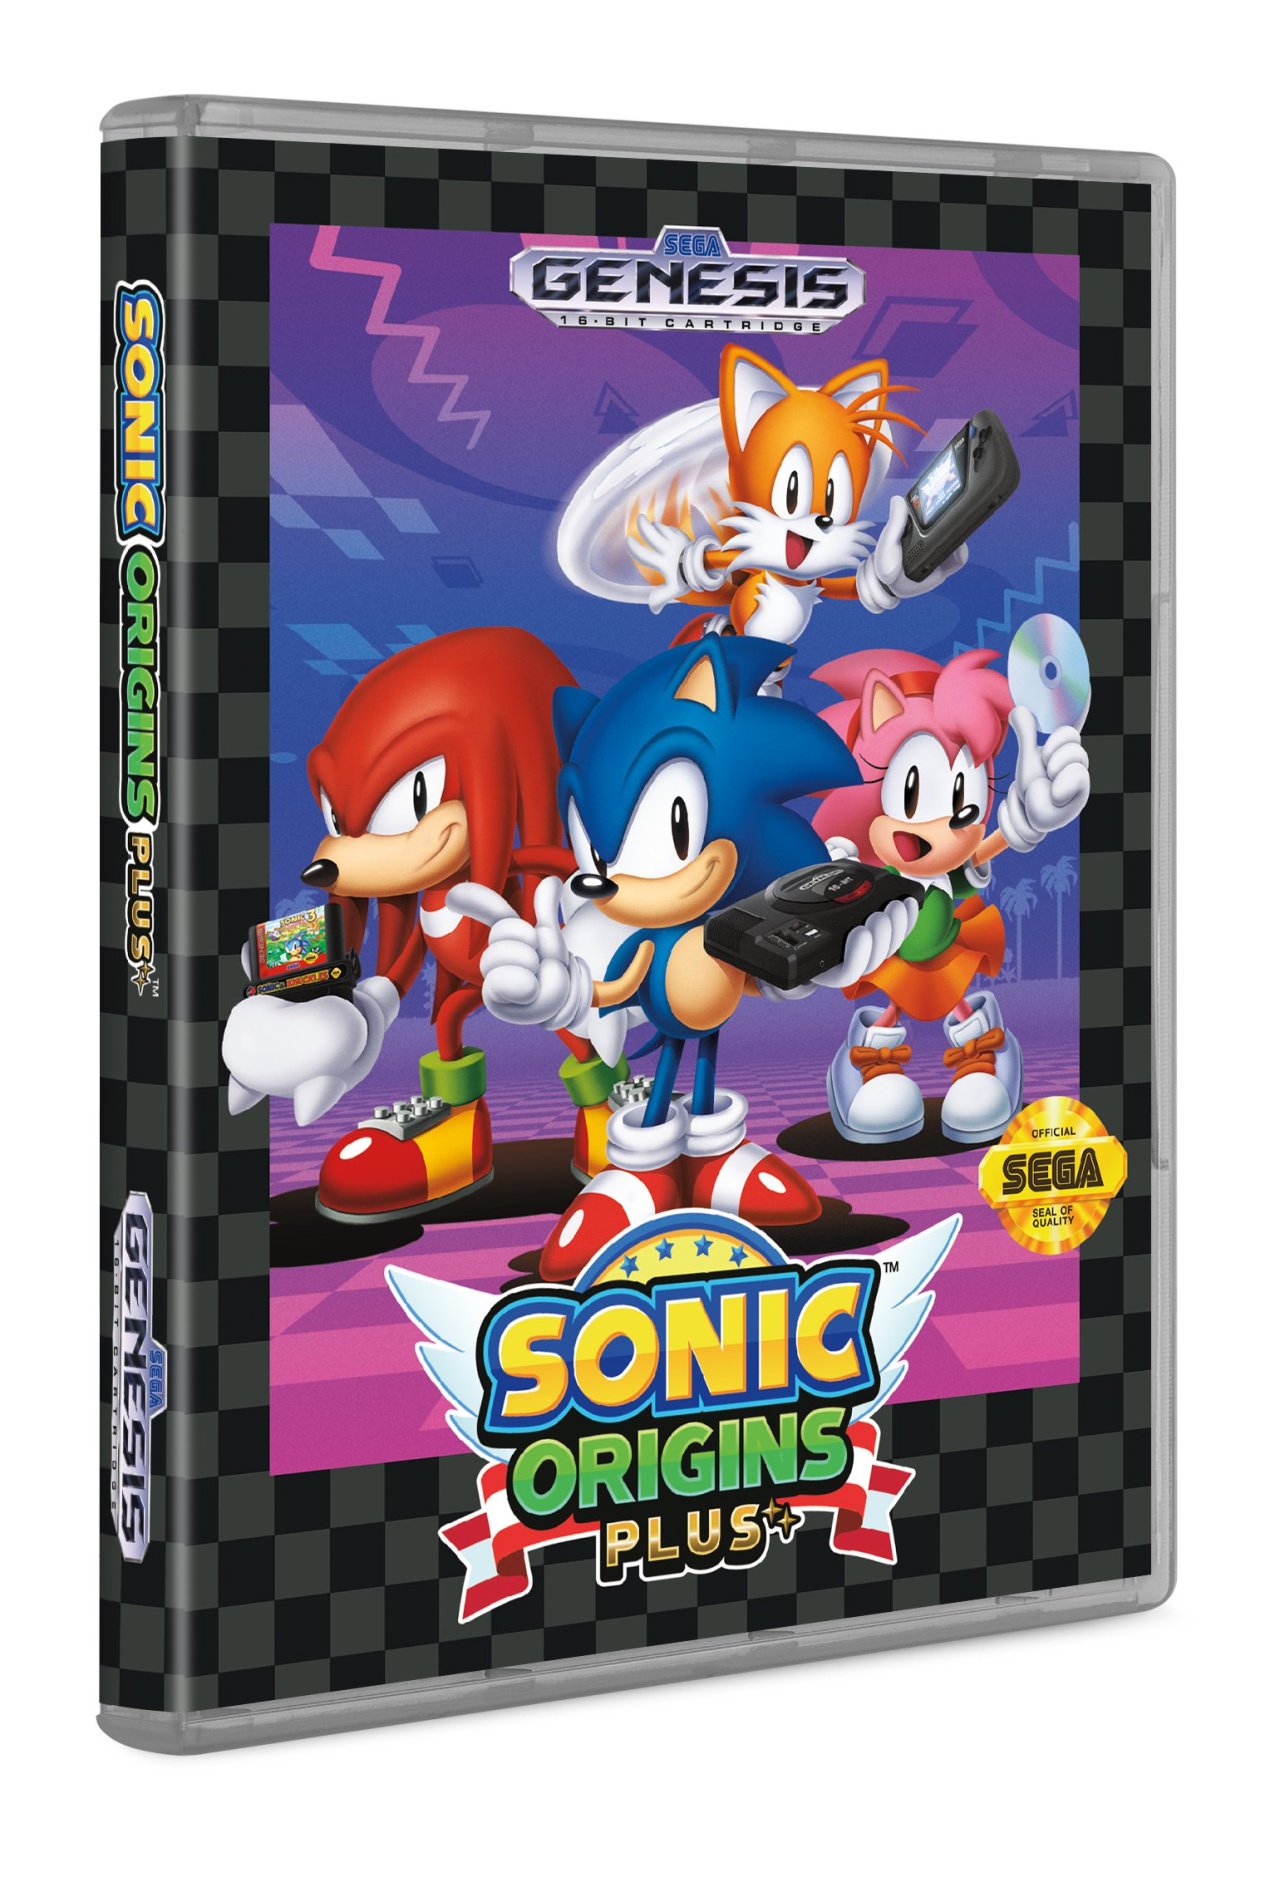 Full list of everything the Sonic Origins DLC will contain, from SEGA  Asia's website : r/SonicTheHedgehog